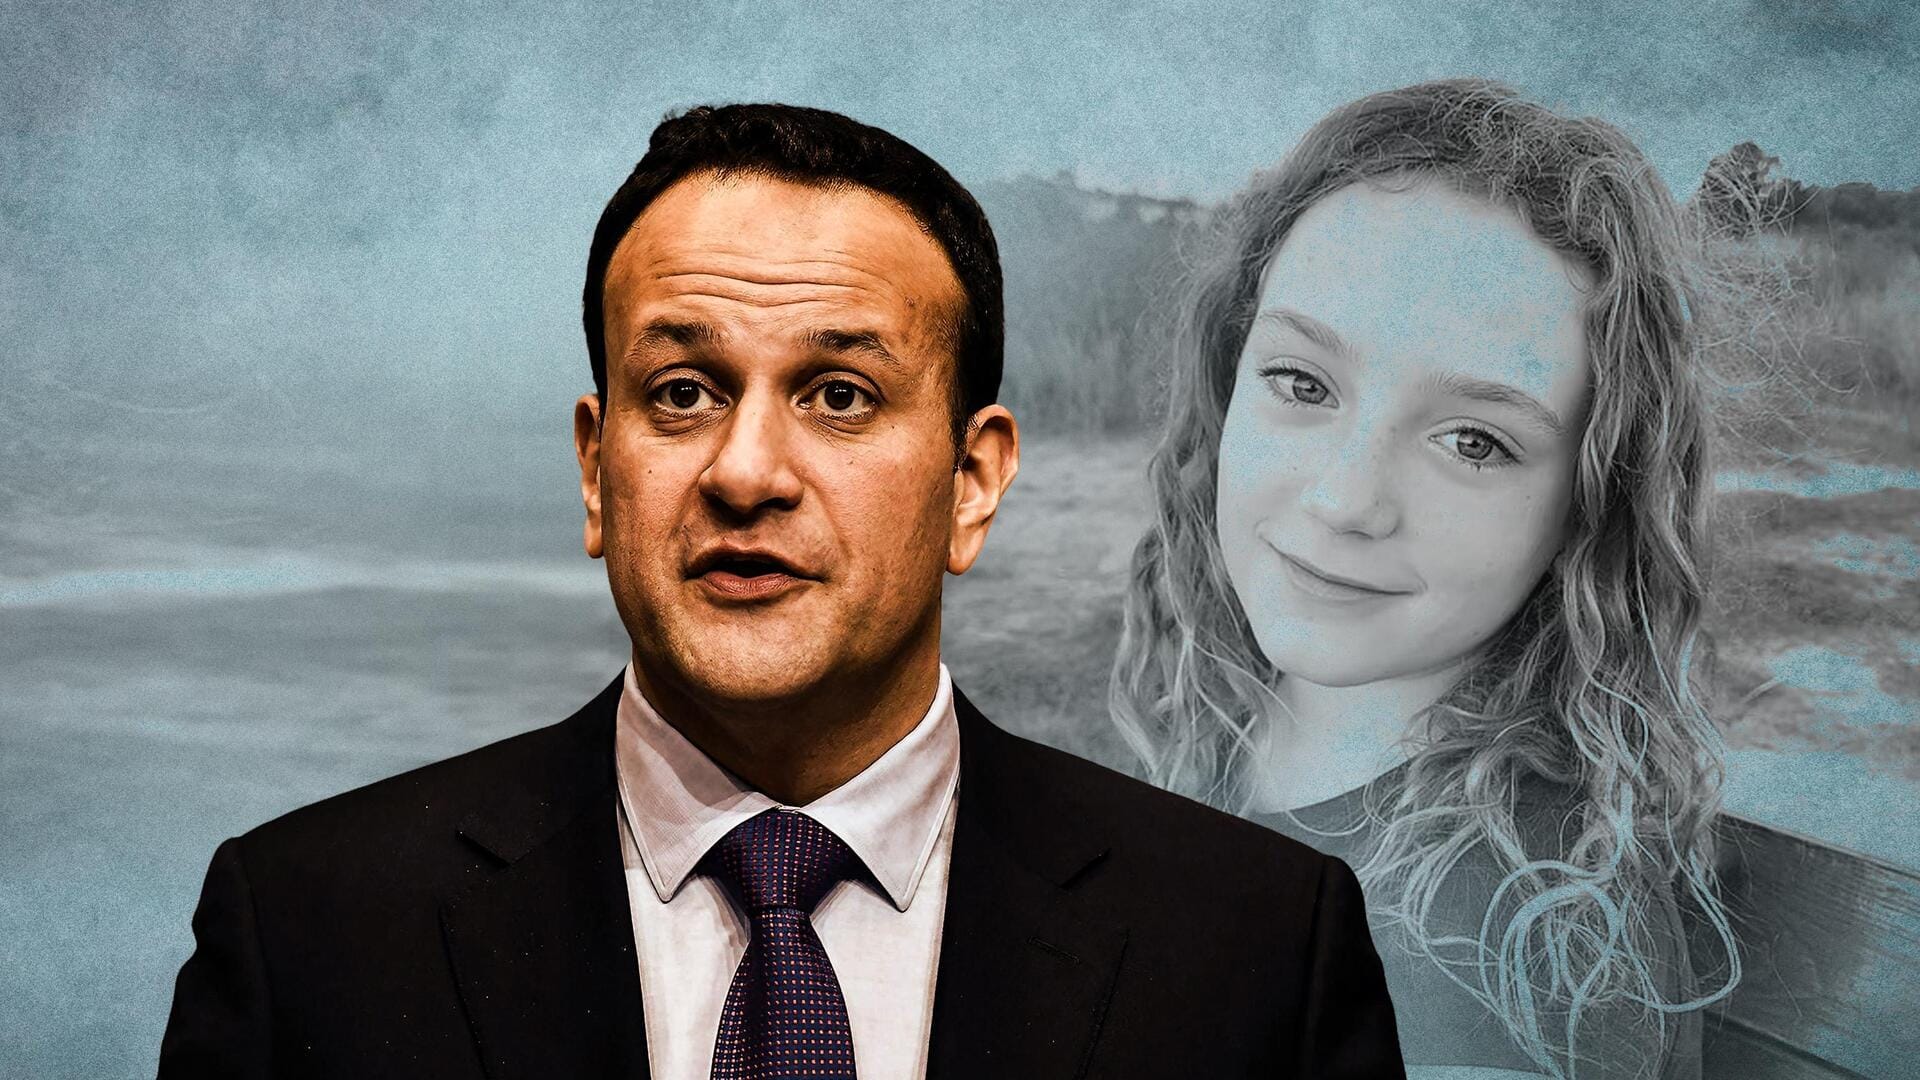 Israel slams Irish PM for 'lost' remark on 9-year-old hostage